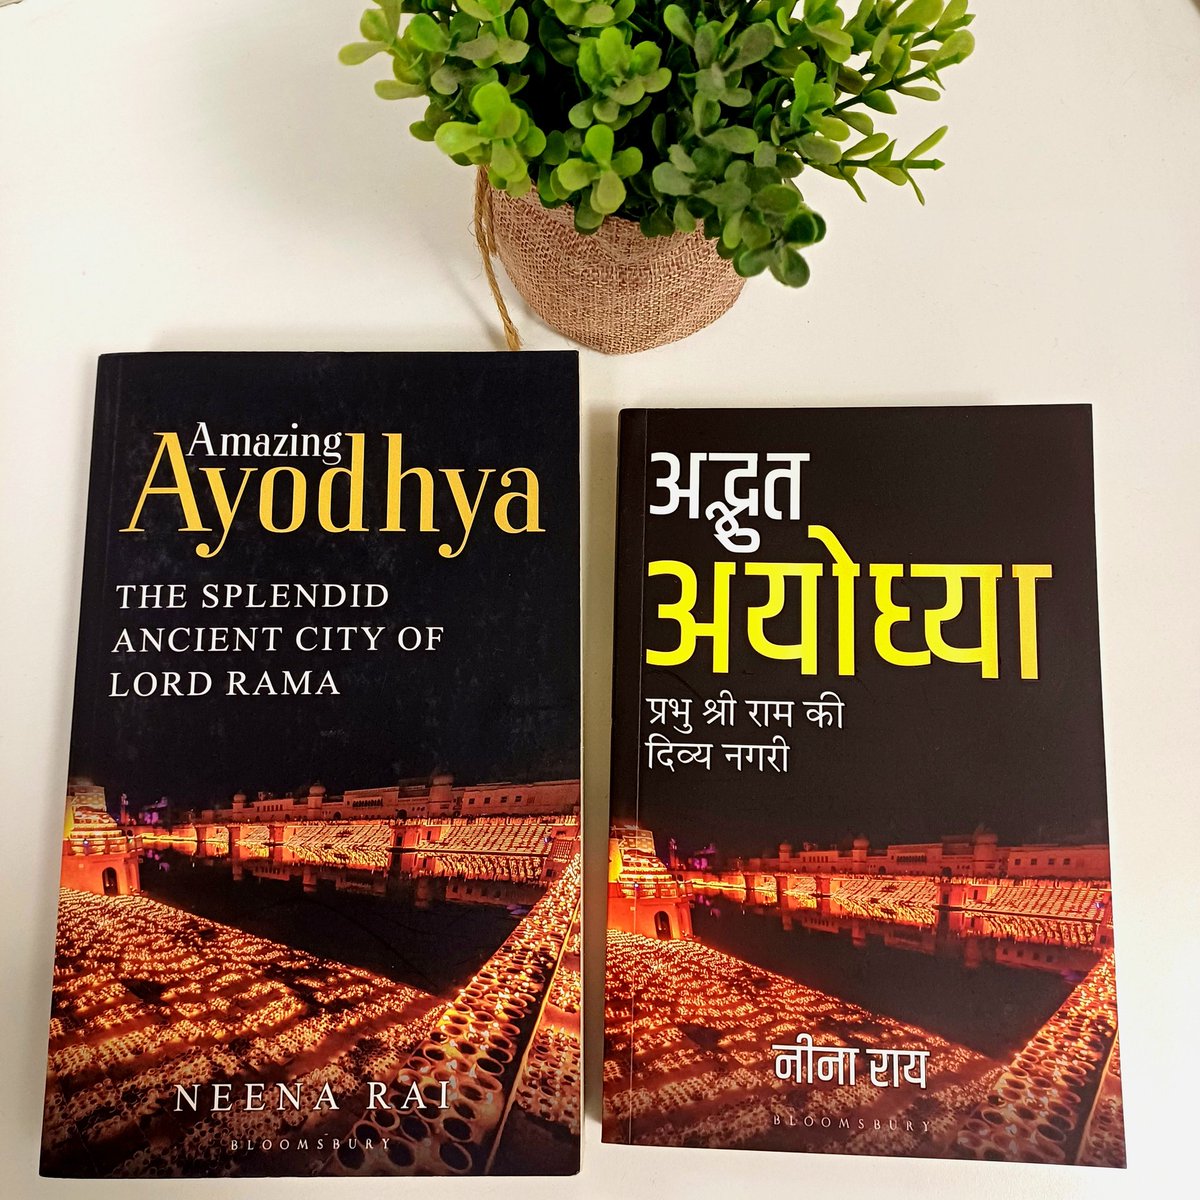 A fascinating account of an ancient city with significant contemporary relevance, #AmazingAyodhya by @NeenaRai is a must-read for a better understanding of history, scriptures and Hindu civilisation. #RamNavami